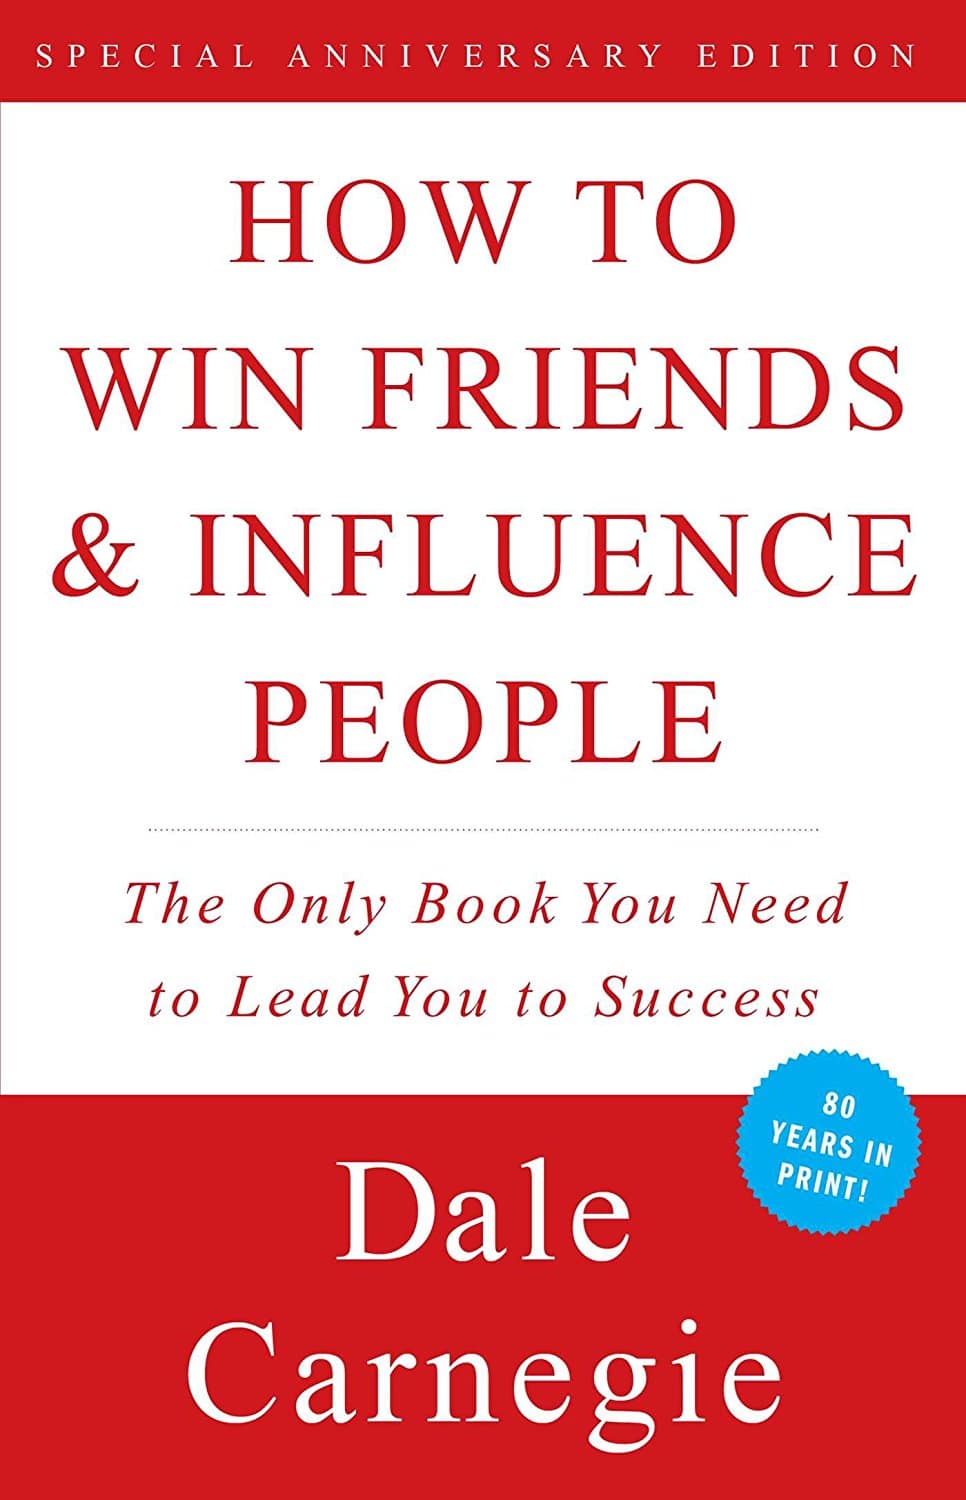 <br /></noscript>
How to Win Friends & Influence People by Dale Carnegie